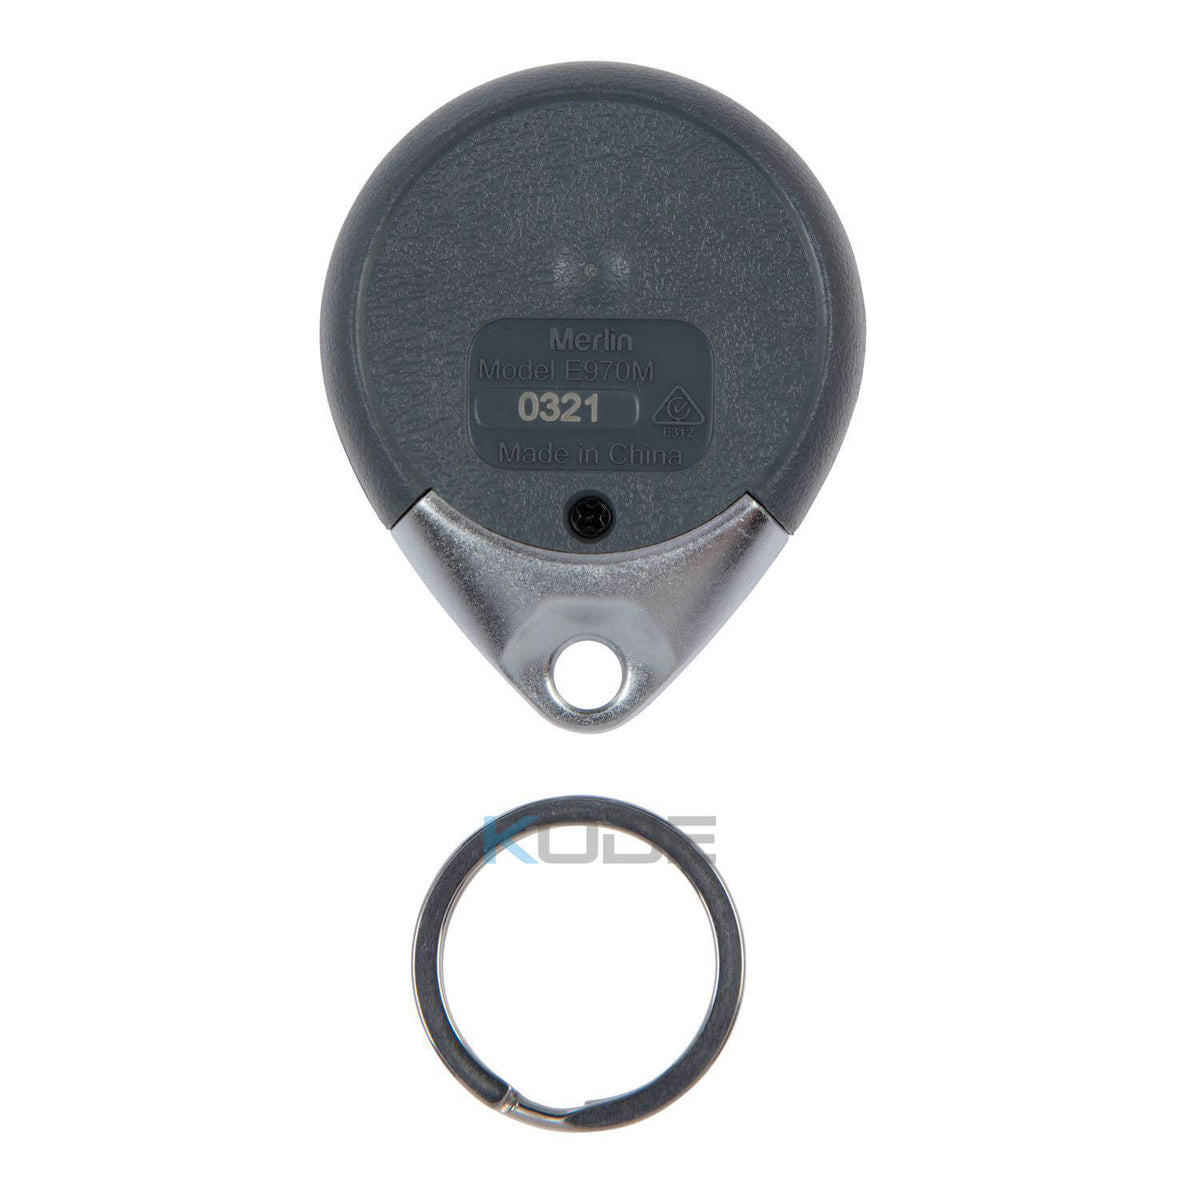 Merlin E970M Remote with Keyring - Back